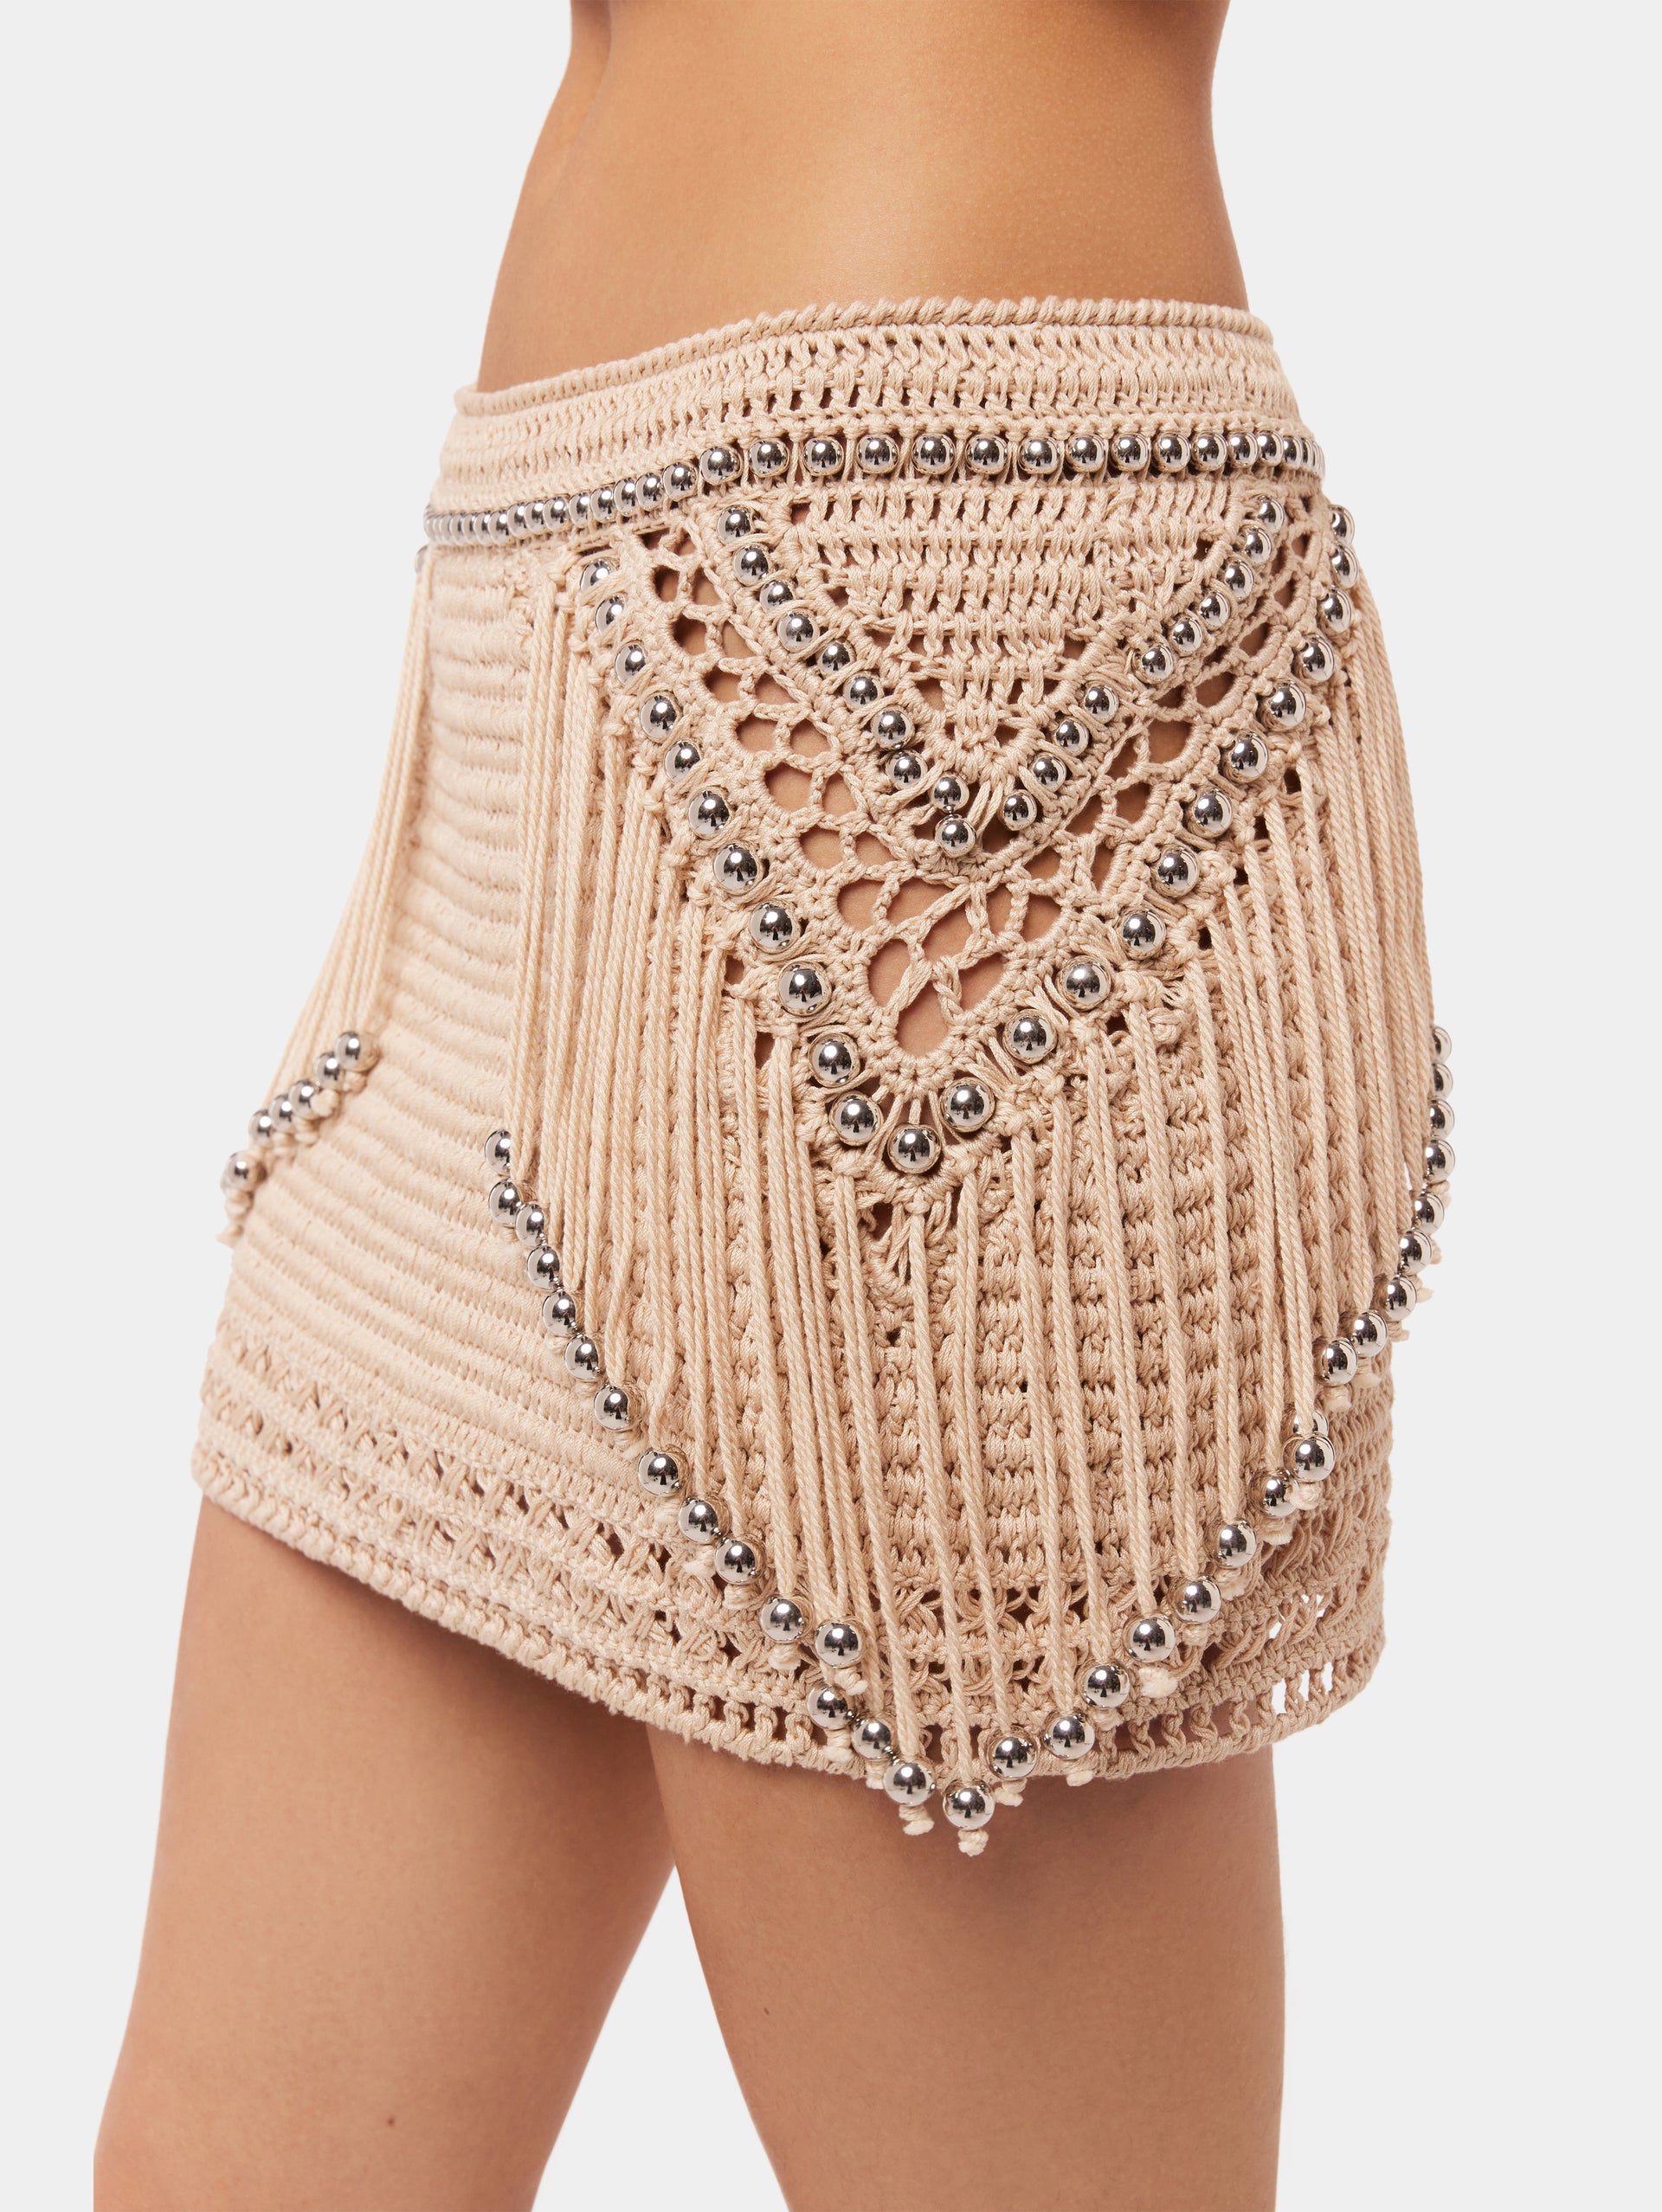 MINI CROCHET SKIRT WITH PEARLS DETAILS AND FRINGES